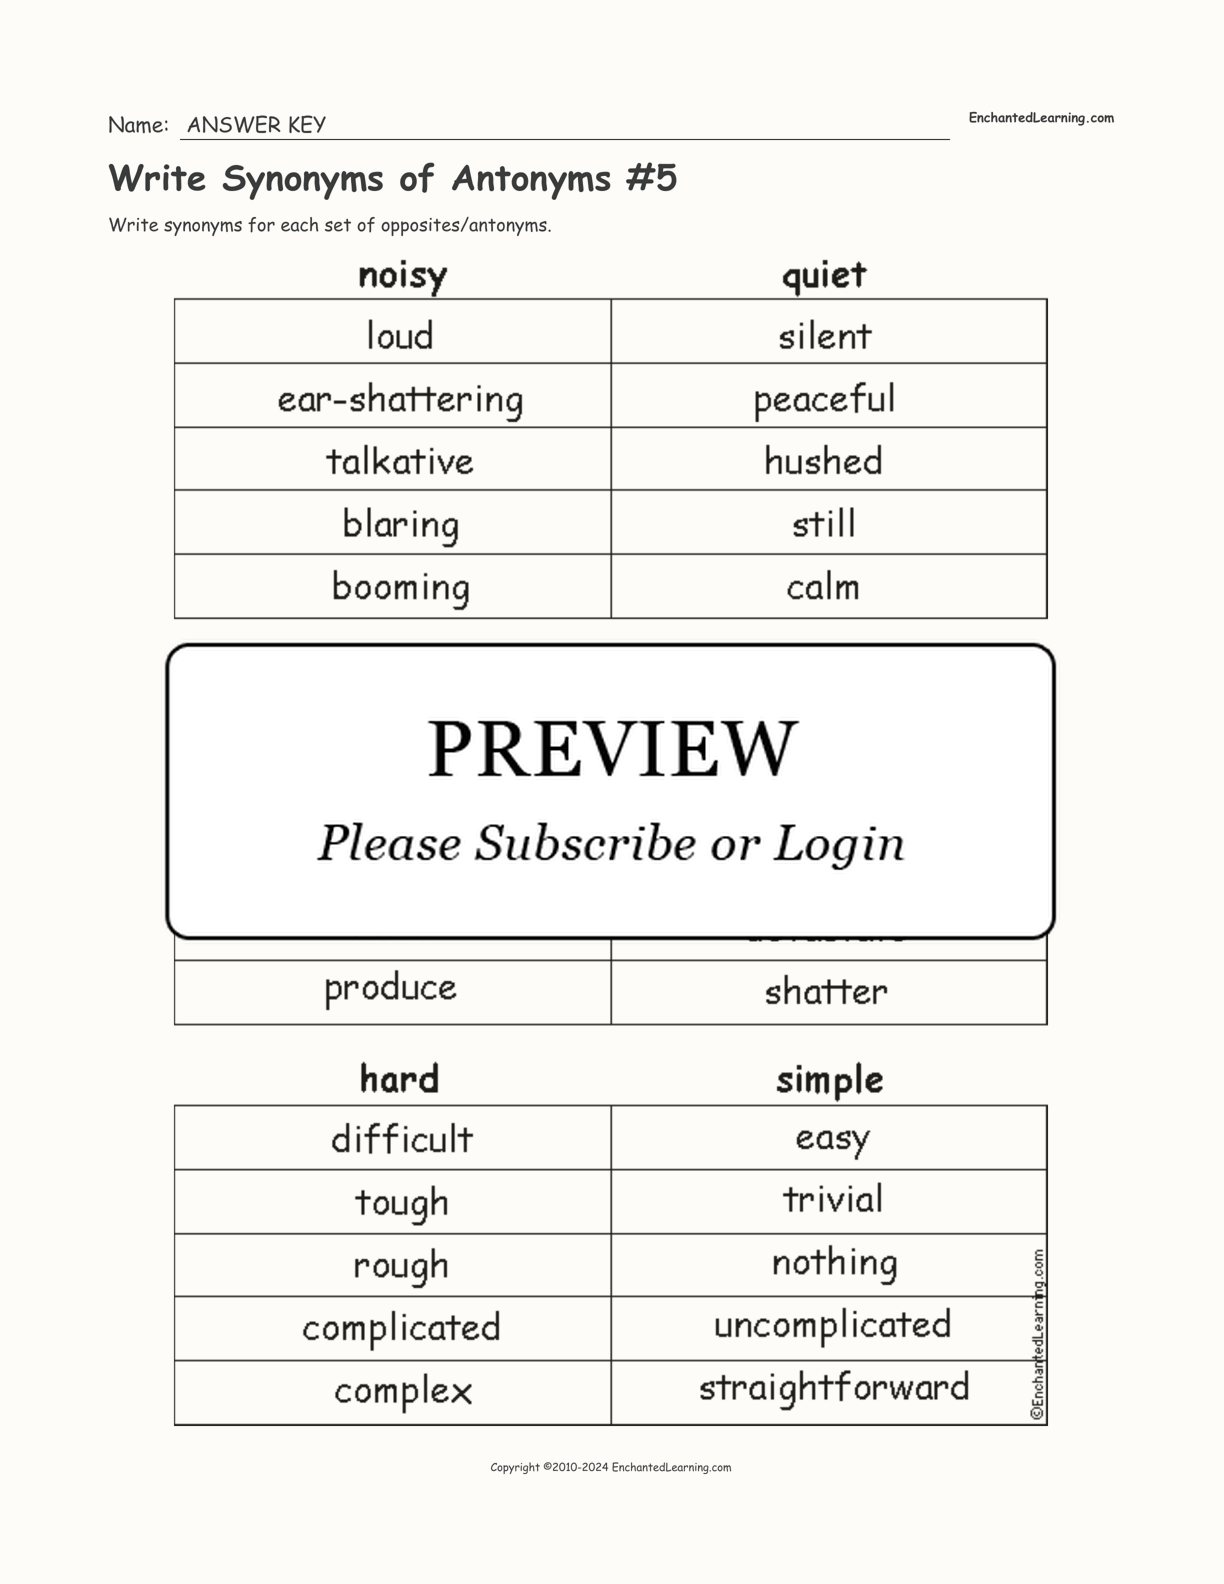 Write Synonyms of Antonyms #5 interactive worksheet page 2